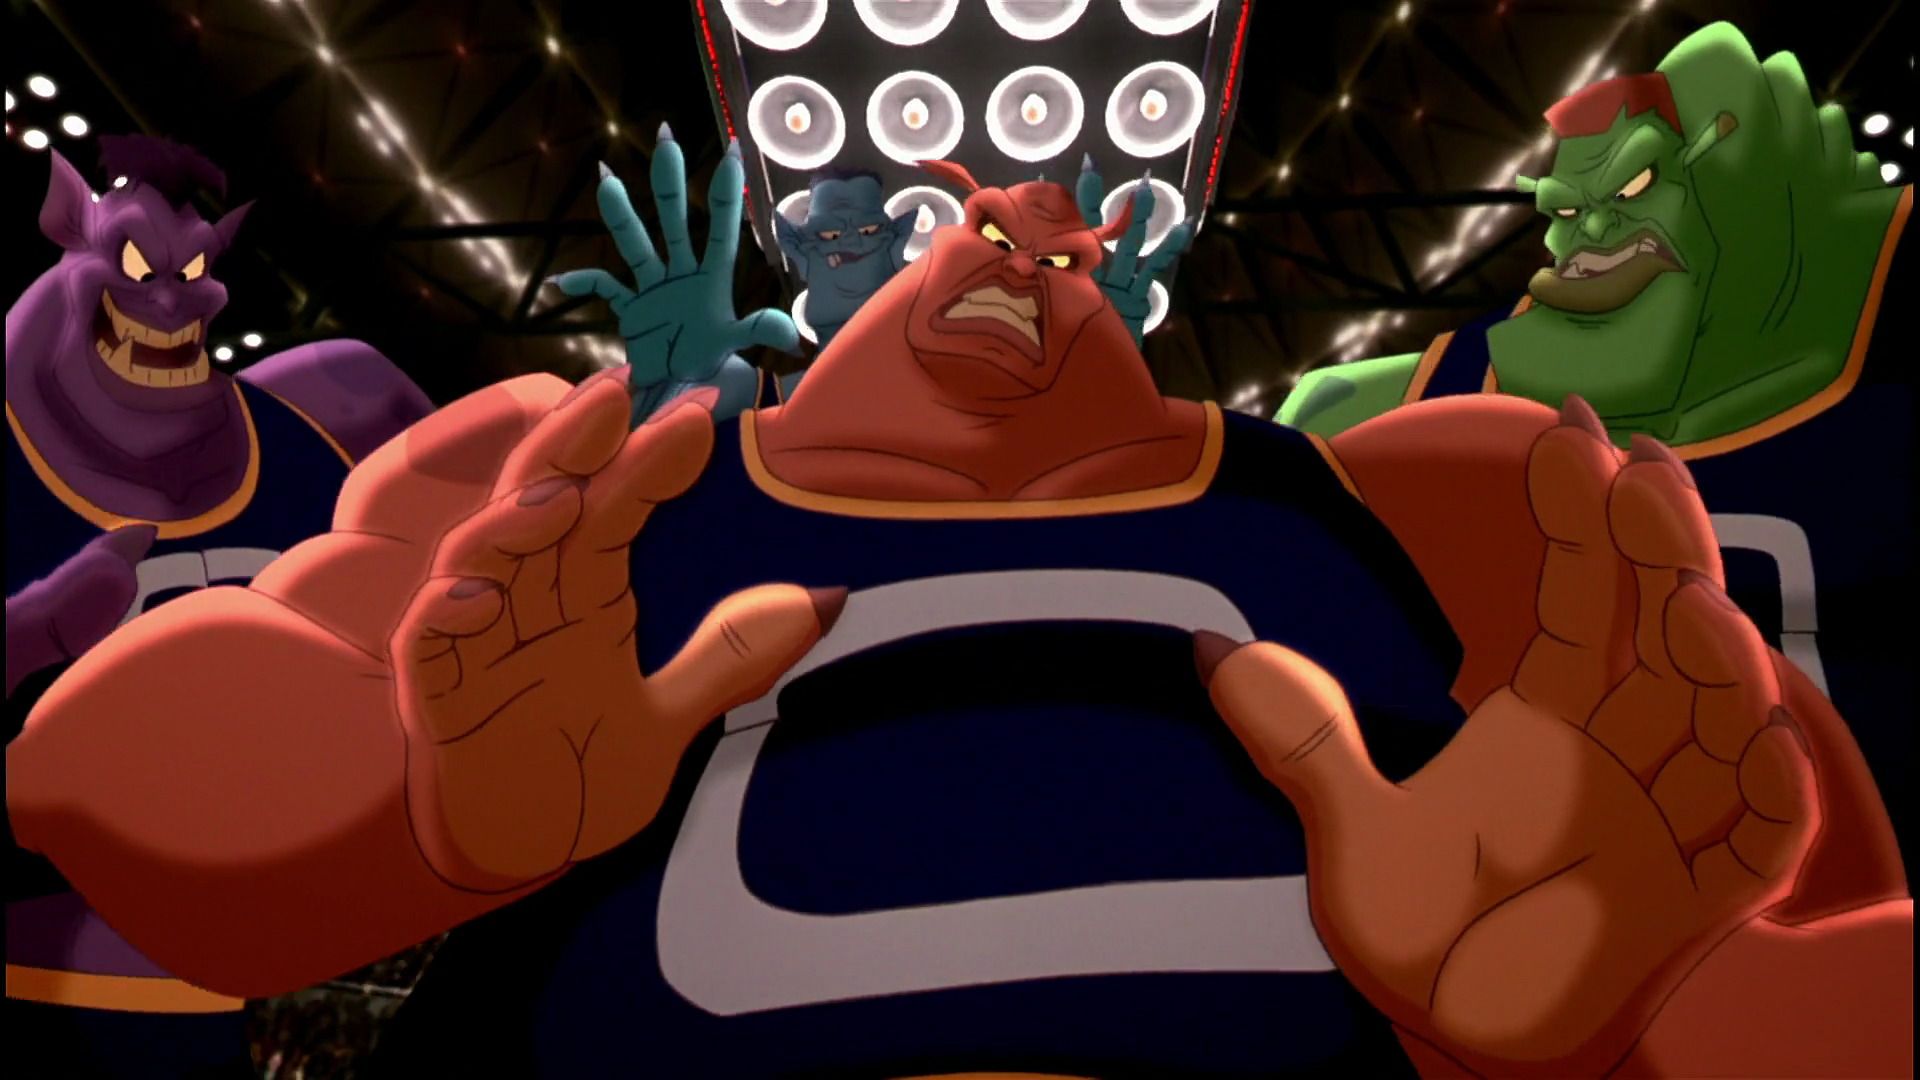 It's Been Over 20 Years Since 'Space Jam' Came Out, But What Ever Happened To The Monstars?